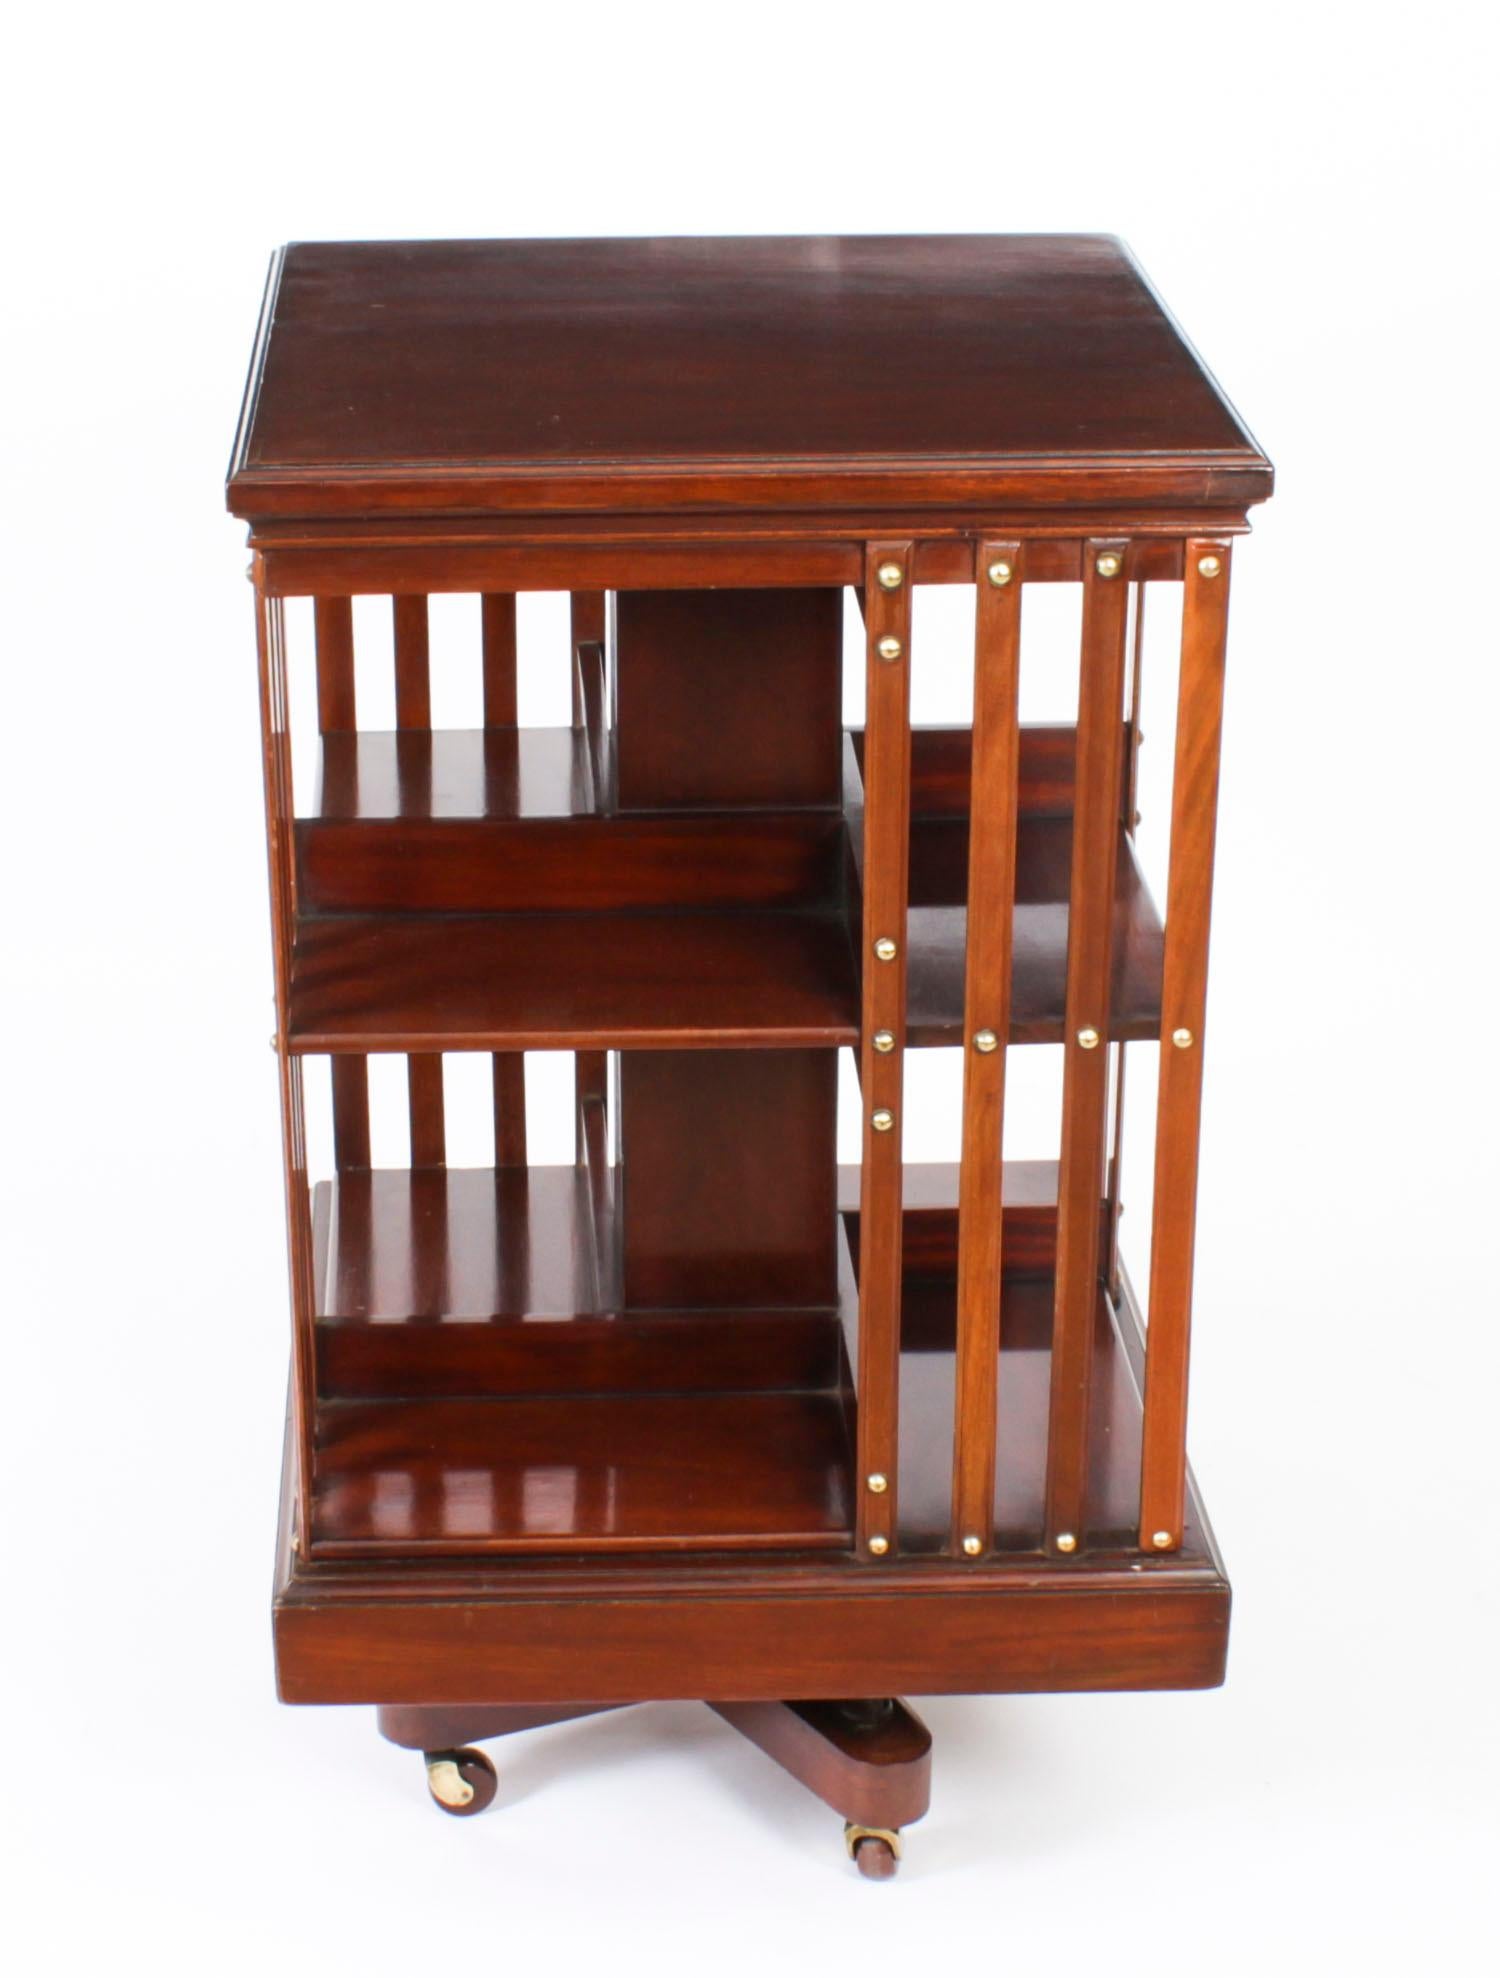 Antique Revolving Bookcase Flame Mahogany Early 20th Century 4